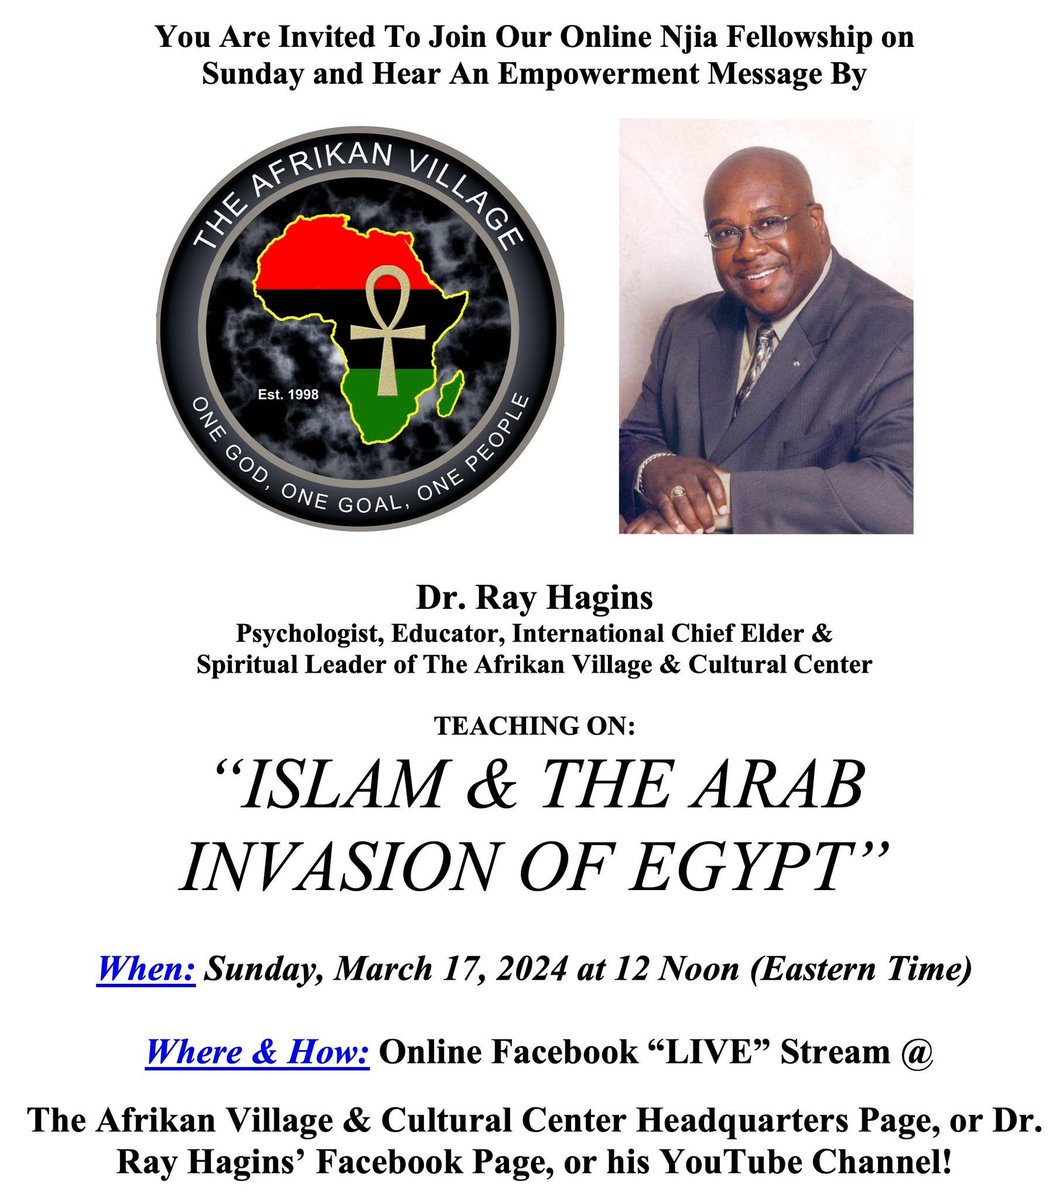 We are 1 hour away from today's Sunday Njia Fellowship  Starts Noon EST (11am CST). I'll be sharing from Facebook Dr. Ray Hagins will be sharing on Facebook or on youtube (PLEASE SUBSCRIBE) & on The Afrikan Village & Cultural Center - St. Louis (Headquarters) Facebook page
❤🖤💚